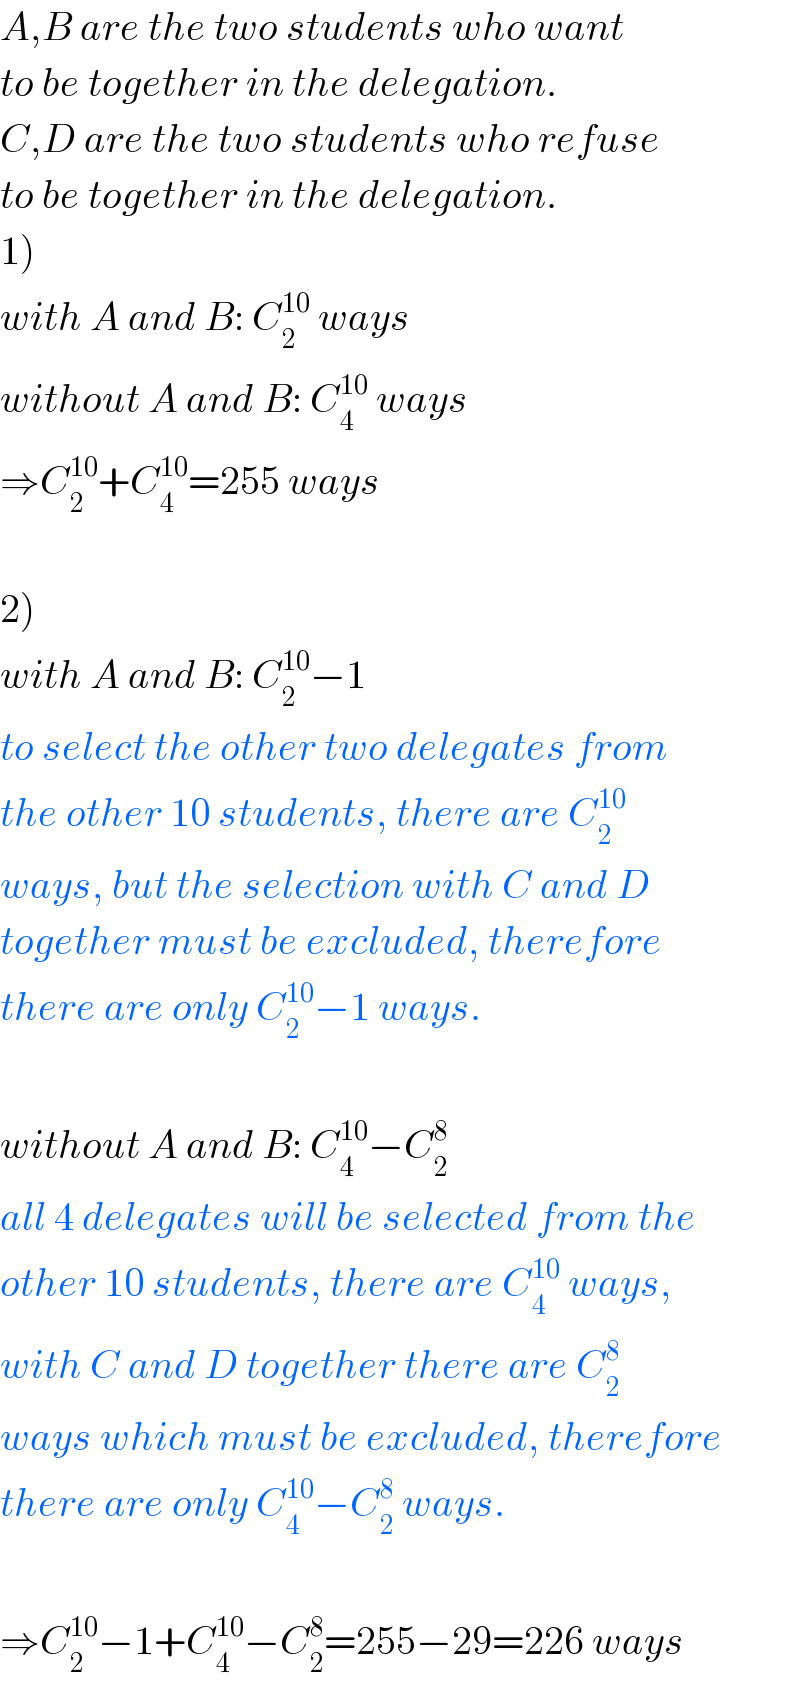 A,B are the two students who want  to be together in the delegation.  C,D are the two students who refuse  to be together in the delegation.  1)  with A and B: C_2 ^(10)  ways  without A and B: C_4 ^(10)  ways  ⇒C_2 ^(10) +C_4 ^(10) =255 ways    2)  with A and B: C_2 ^(10) −1  to select the other two delegates from  the other 10 students, there are C_2 ^(10)   ways, but the selection with C and D  together must be excluded, therefore  there are only C_2 ^(10) −1 ways.    without A and B: C_4 ^(10) −C_2 ^8   all 4 delegates will be selected from the  other 10 students, there are C_4 ^(10)  ways,  with C and D together there are C_2 ^8   ways which must be excluded, therefore  there are only C_4 ^(10) −C_2 ^8  ways.    ⇒C_2 ^(10) −1+C_4 ^(10) −C_2 ^8 =255−29=226 ways  